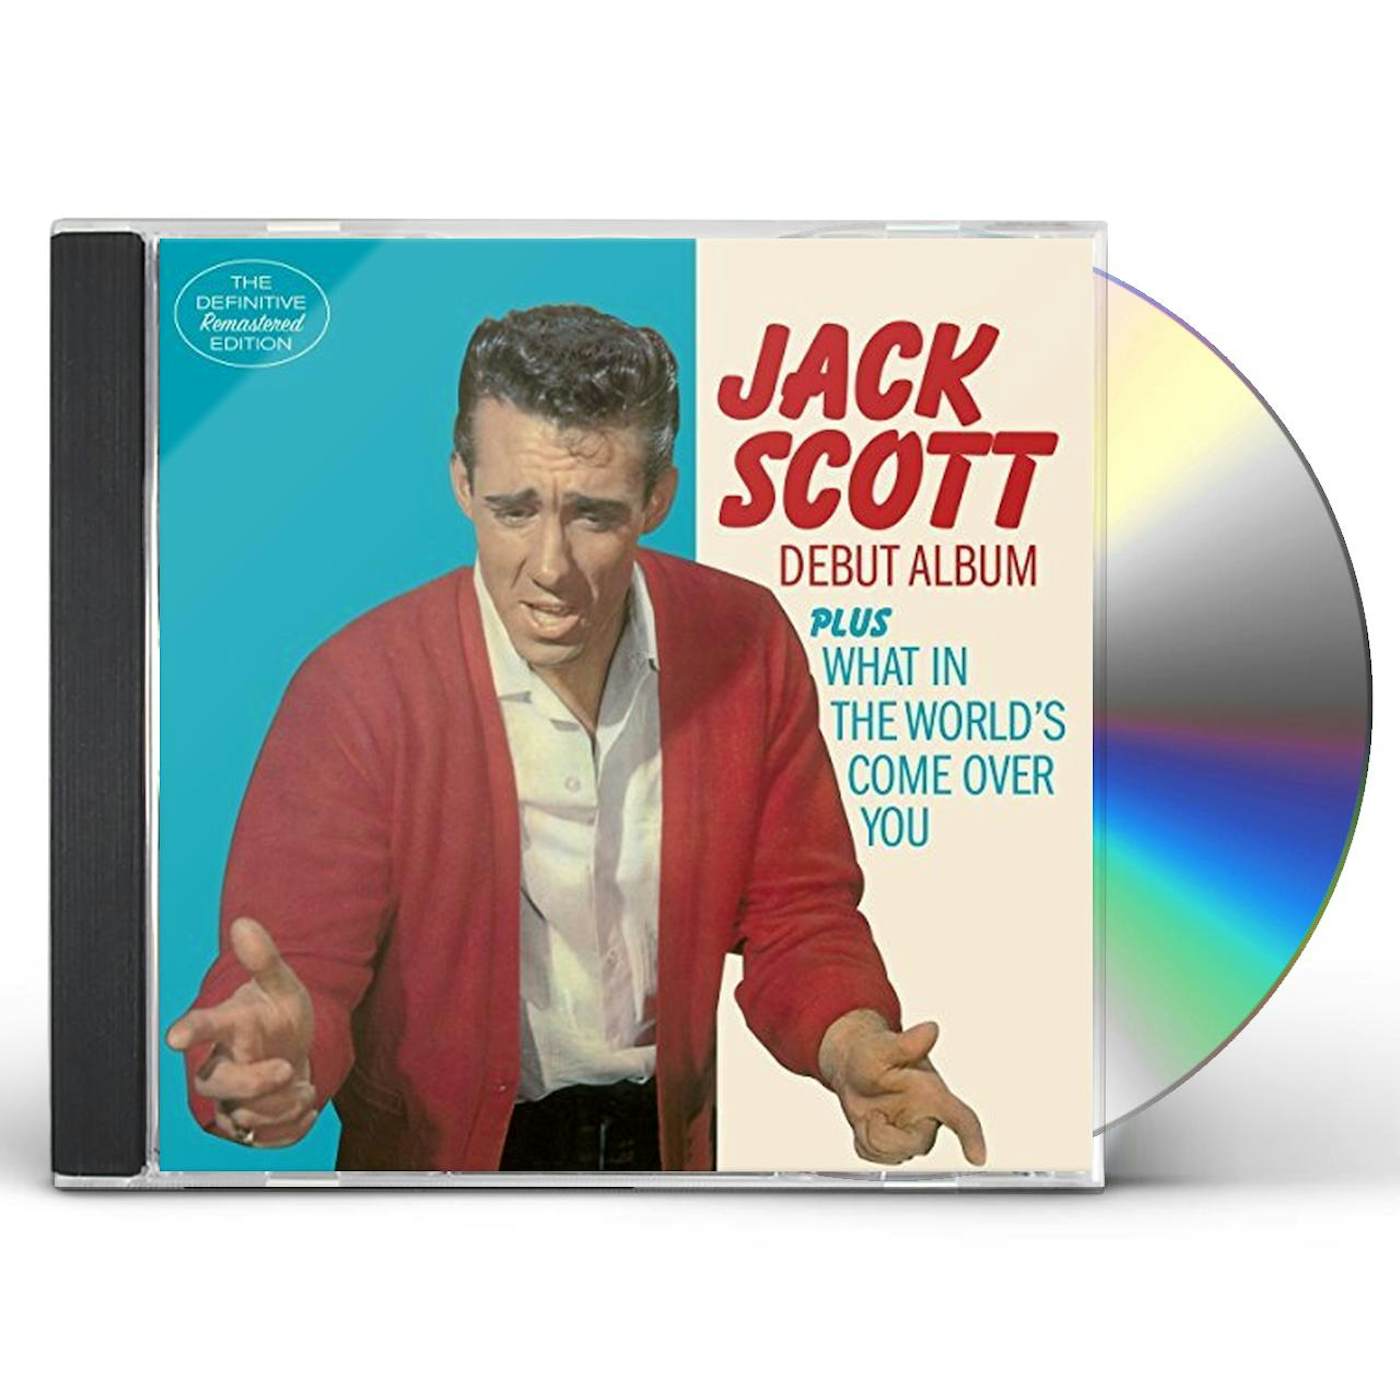 Jack Scott DEBUT ALBUM / WHAT IN THE WORLD'S COME OVER YOU CD